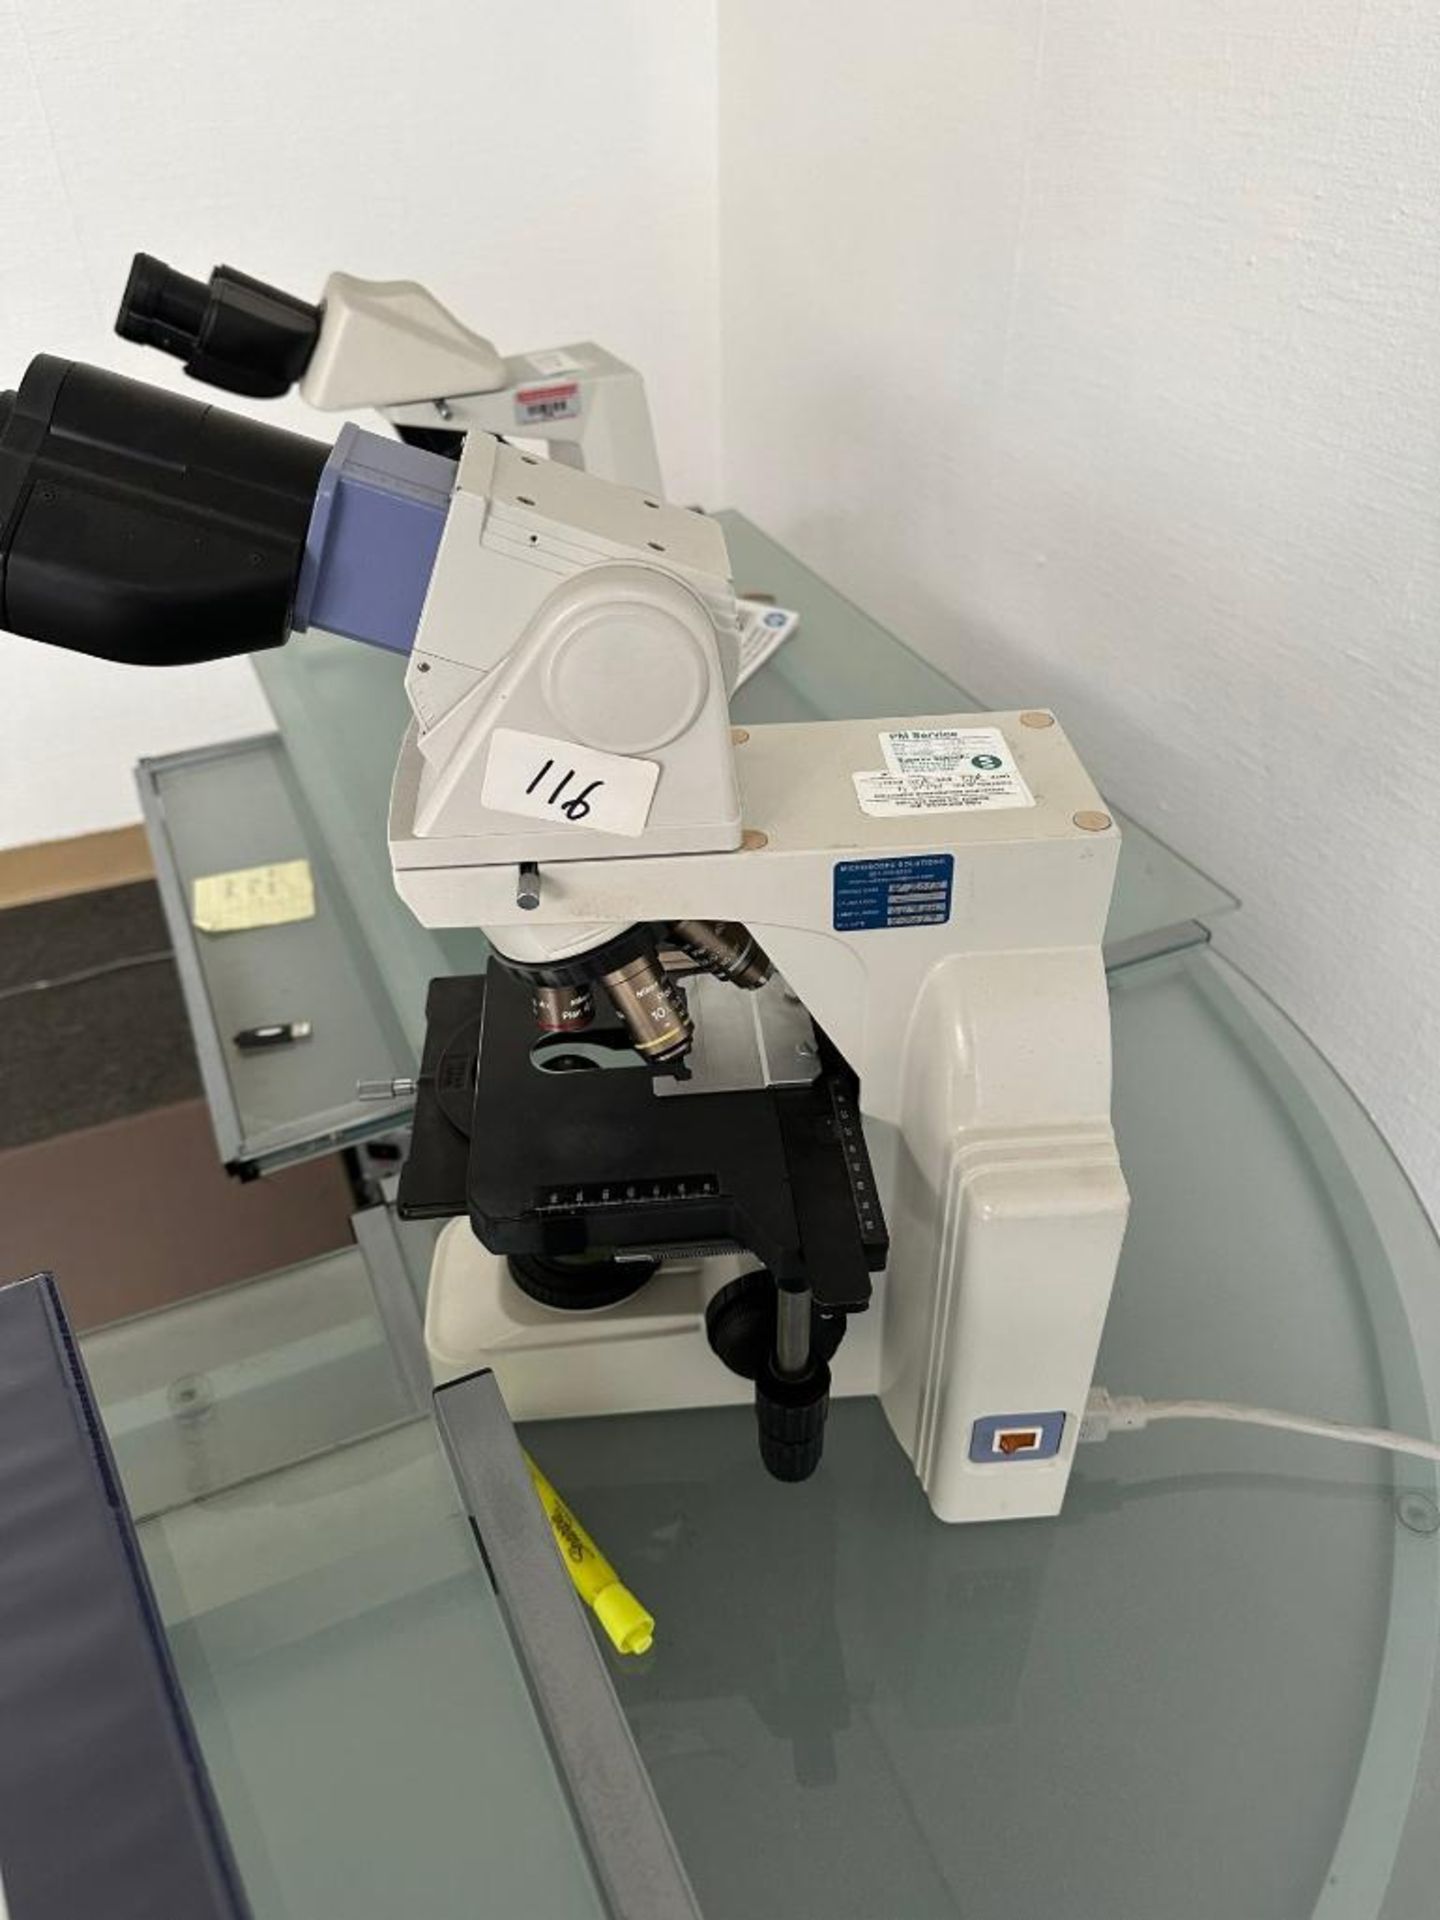 NIKON ECLIPSE E400 LAB MICROSCOPE WITH 4 OBJECTIVES - Image 4 of 4